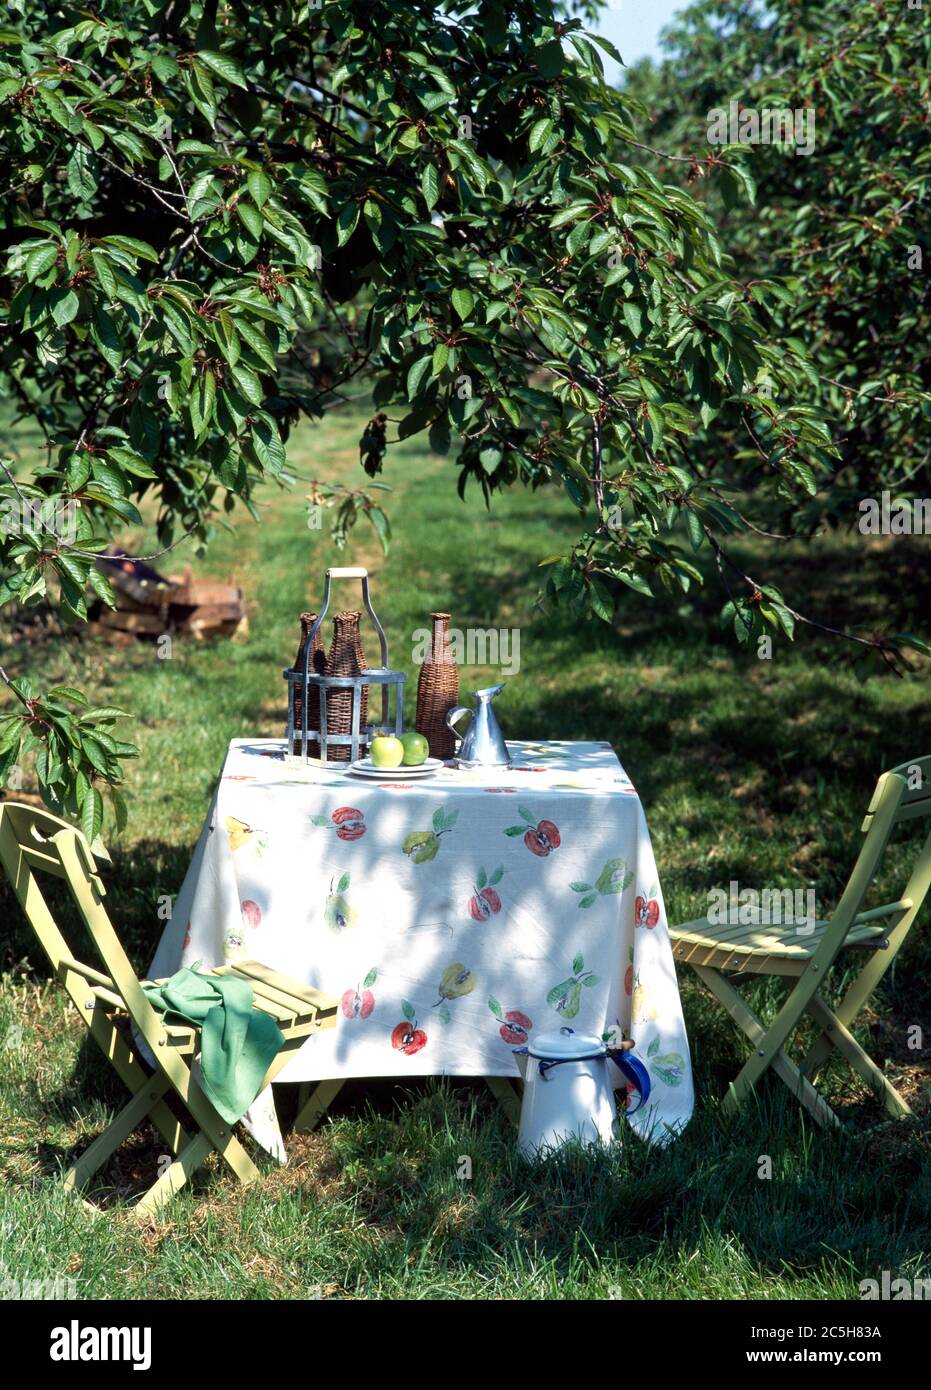 Table and chairs for alfresco eating under fruit trees in orchard Stock Photo